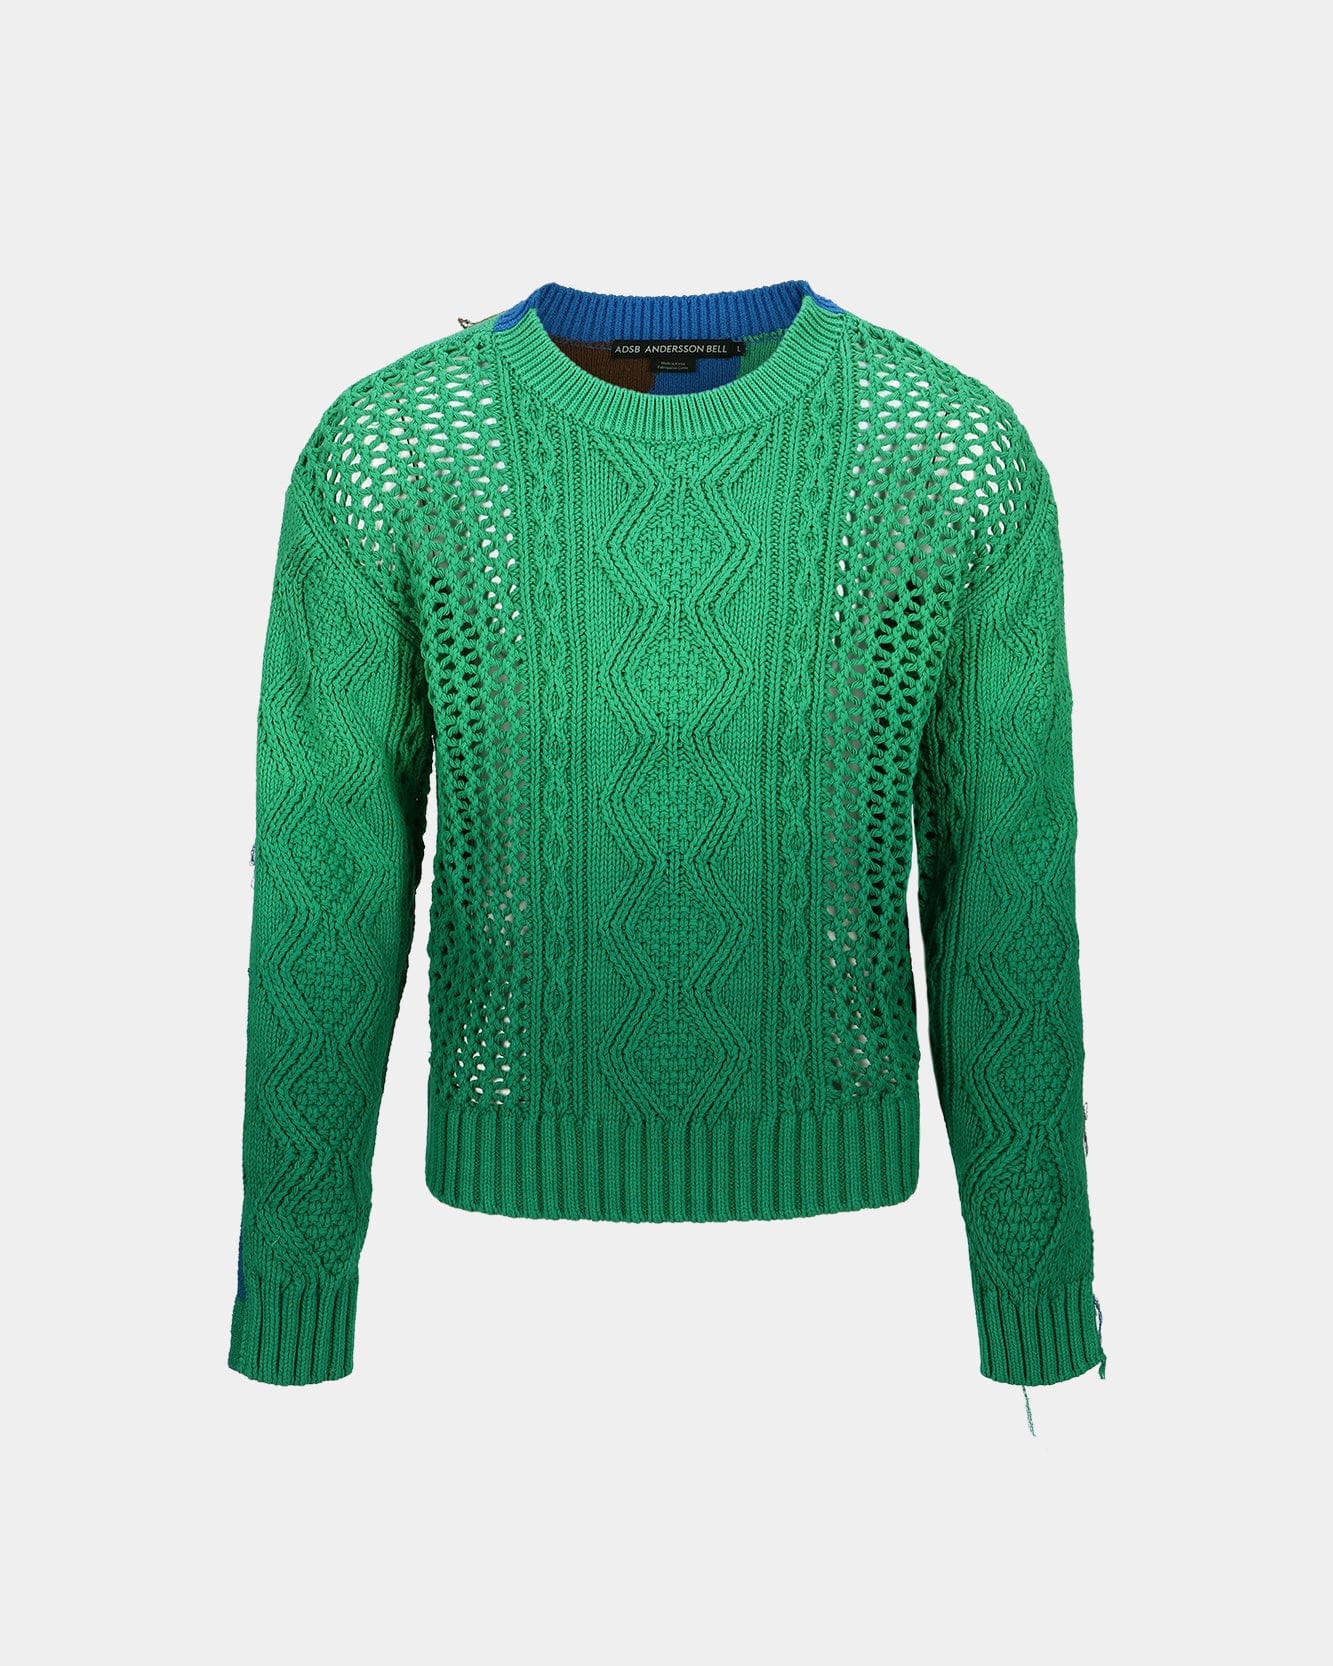 Andersson Bell FISHERMAN INTARSIA CREW-NECK SWEATER atb1064m(GREEN)